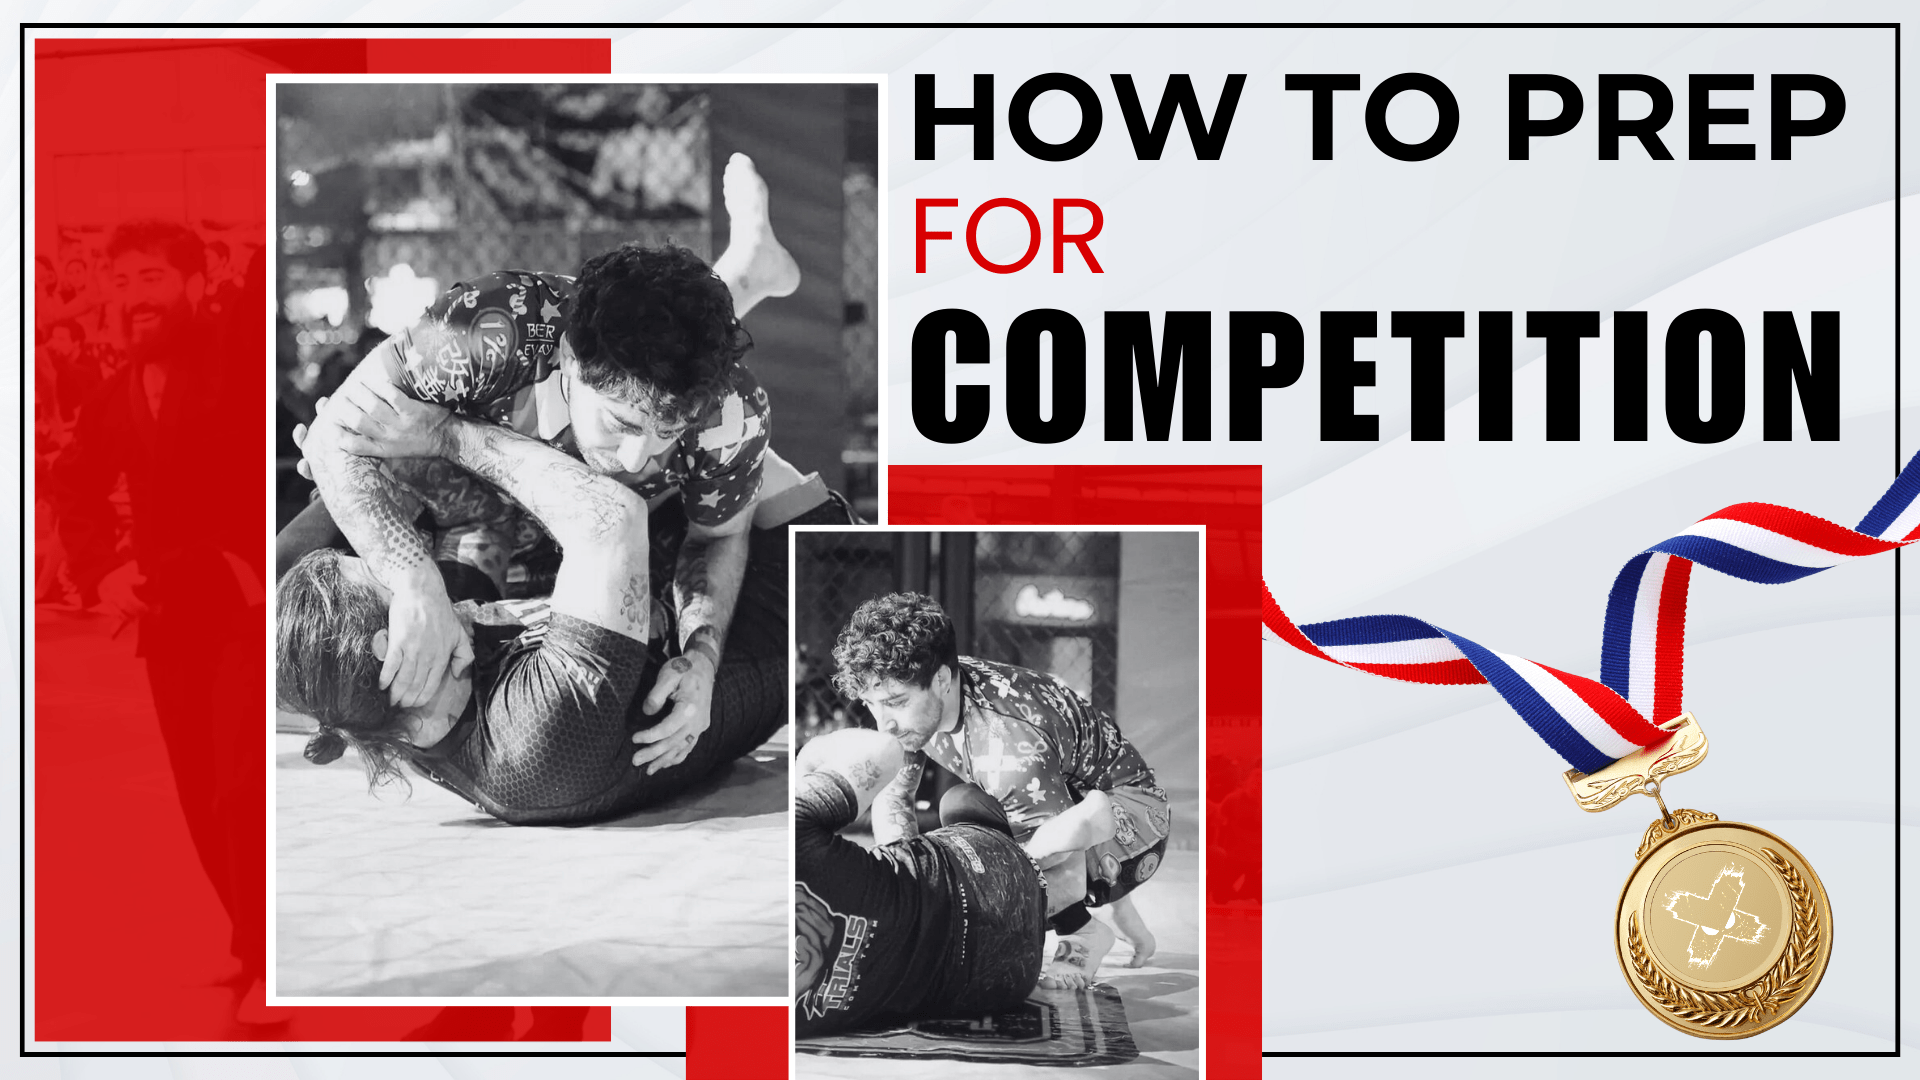 How to Prep for Competition by Black-Belt Chad 'The Dad' Myers XMARTIAL